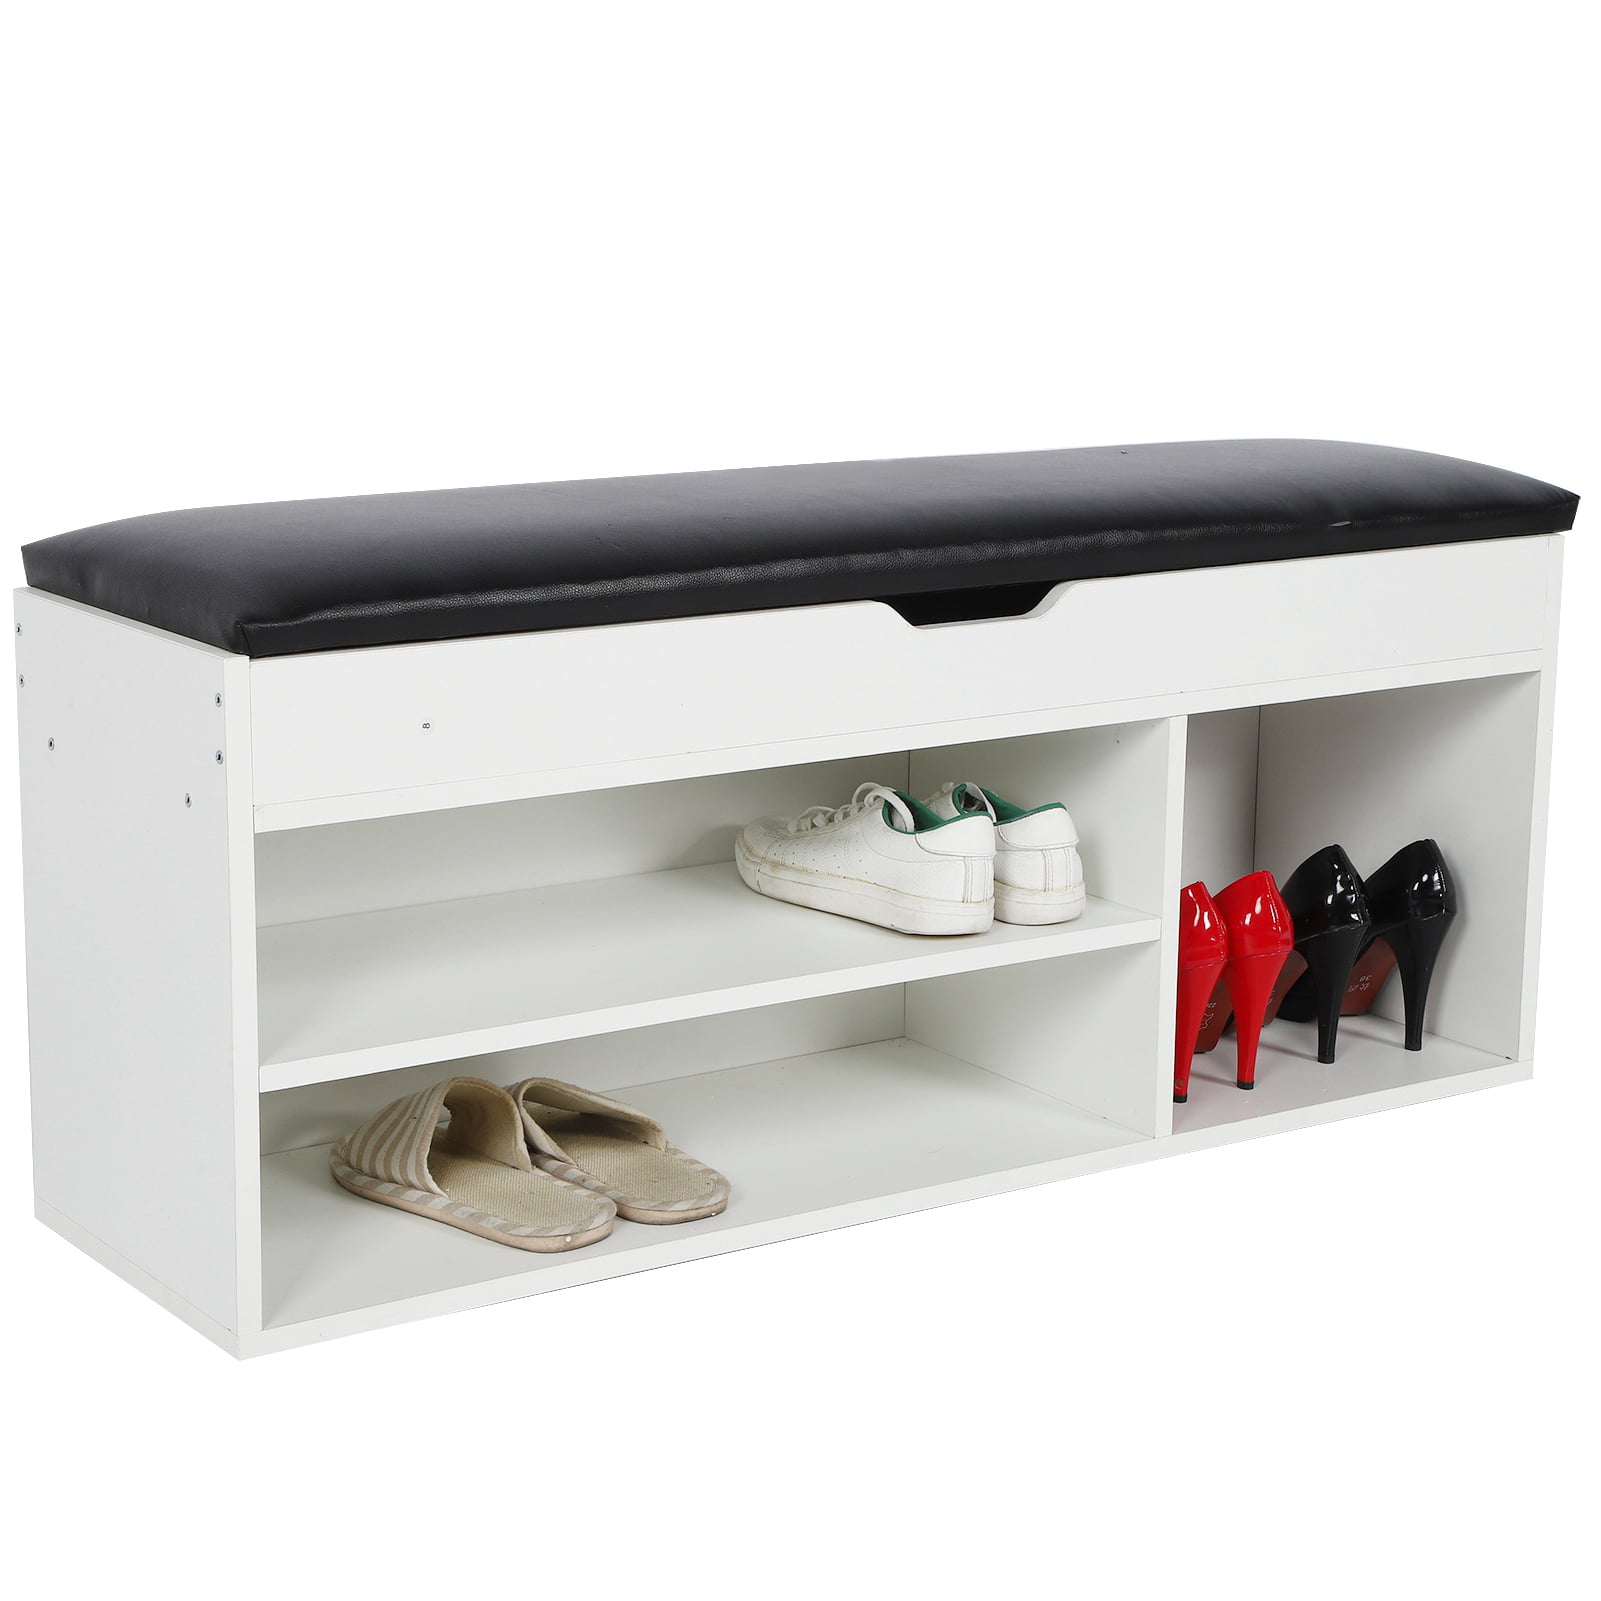 Hurrise Shoe Storage Bench With Cushion, Wooden Shoe Cabinet Storage Bench With Seat Cushion